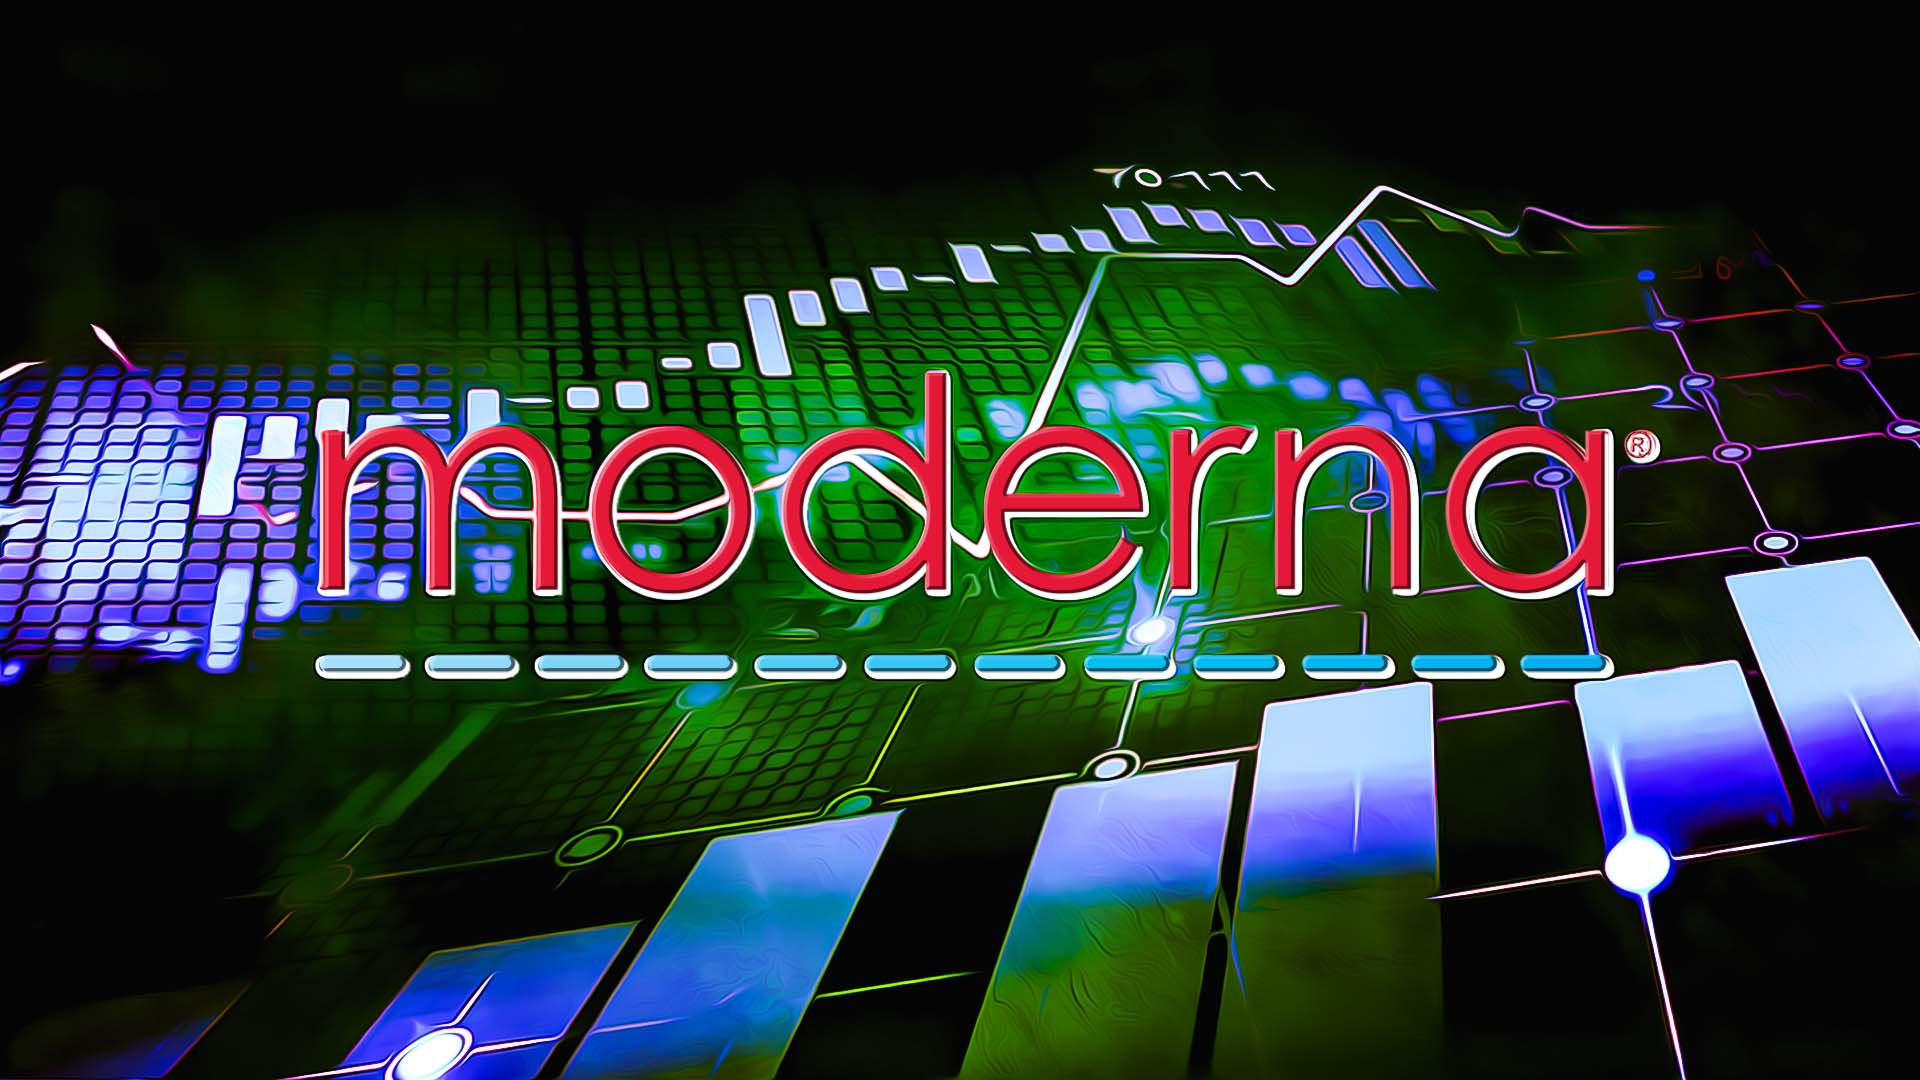 Moderna Stock jumped 8%, Is the correction over in MRNA stock?